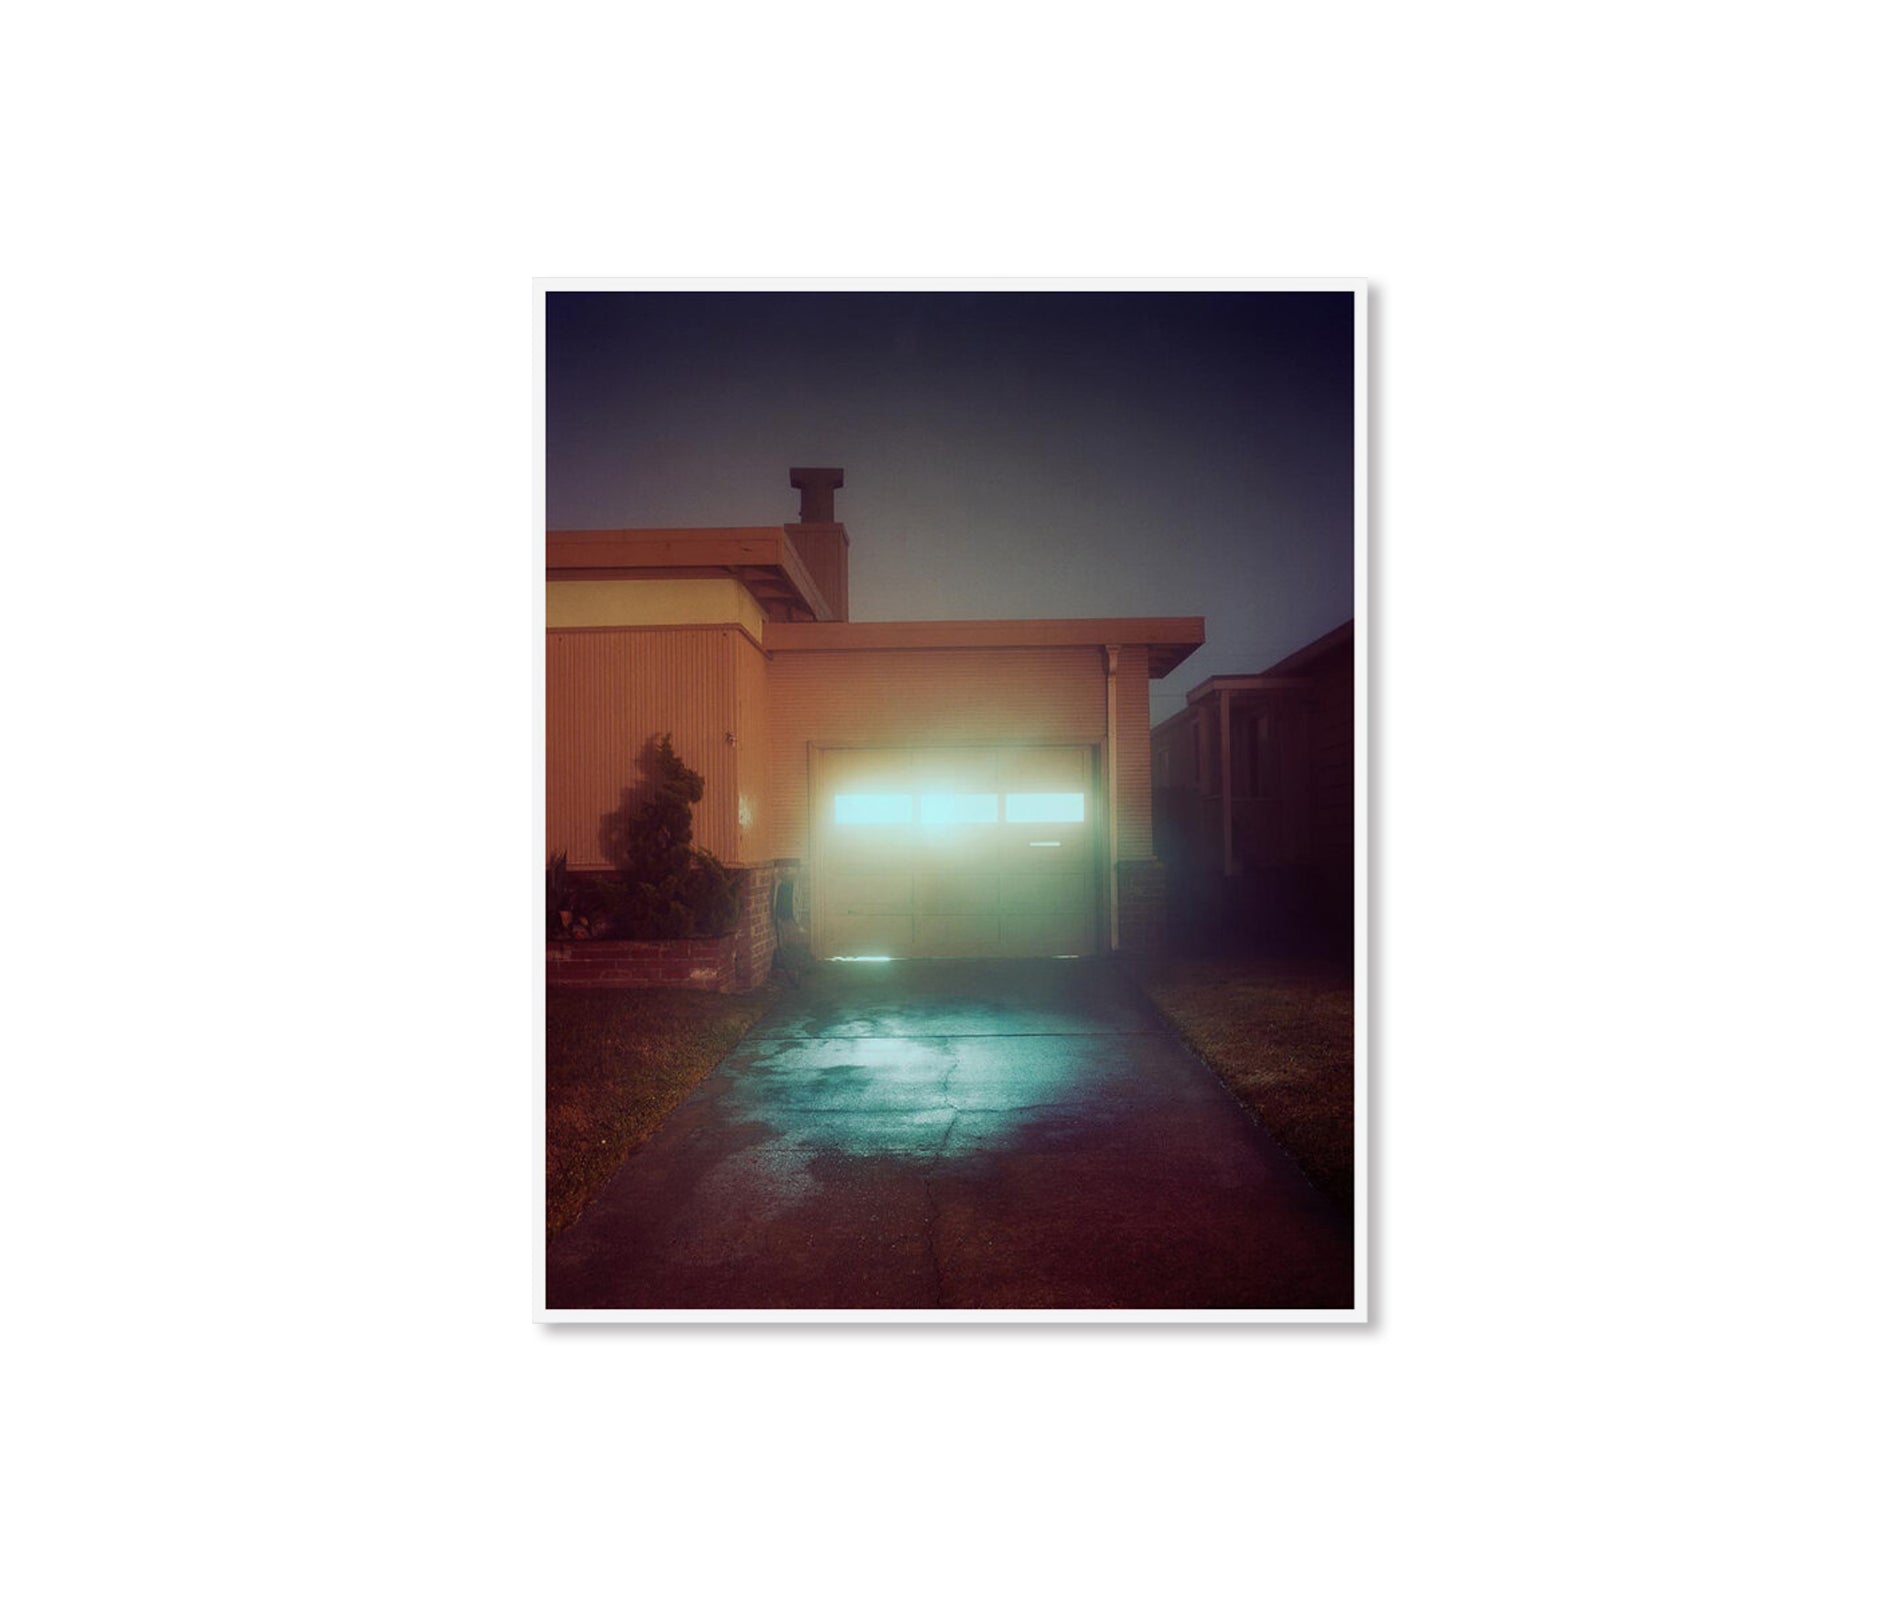 OUTSKIRTS by Todd Hido DELUXE EDITION